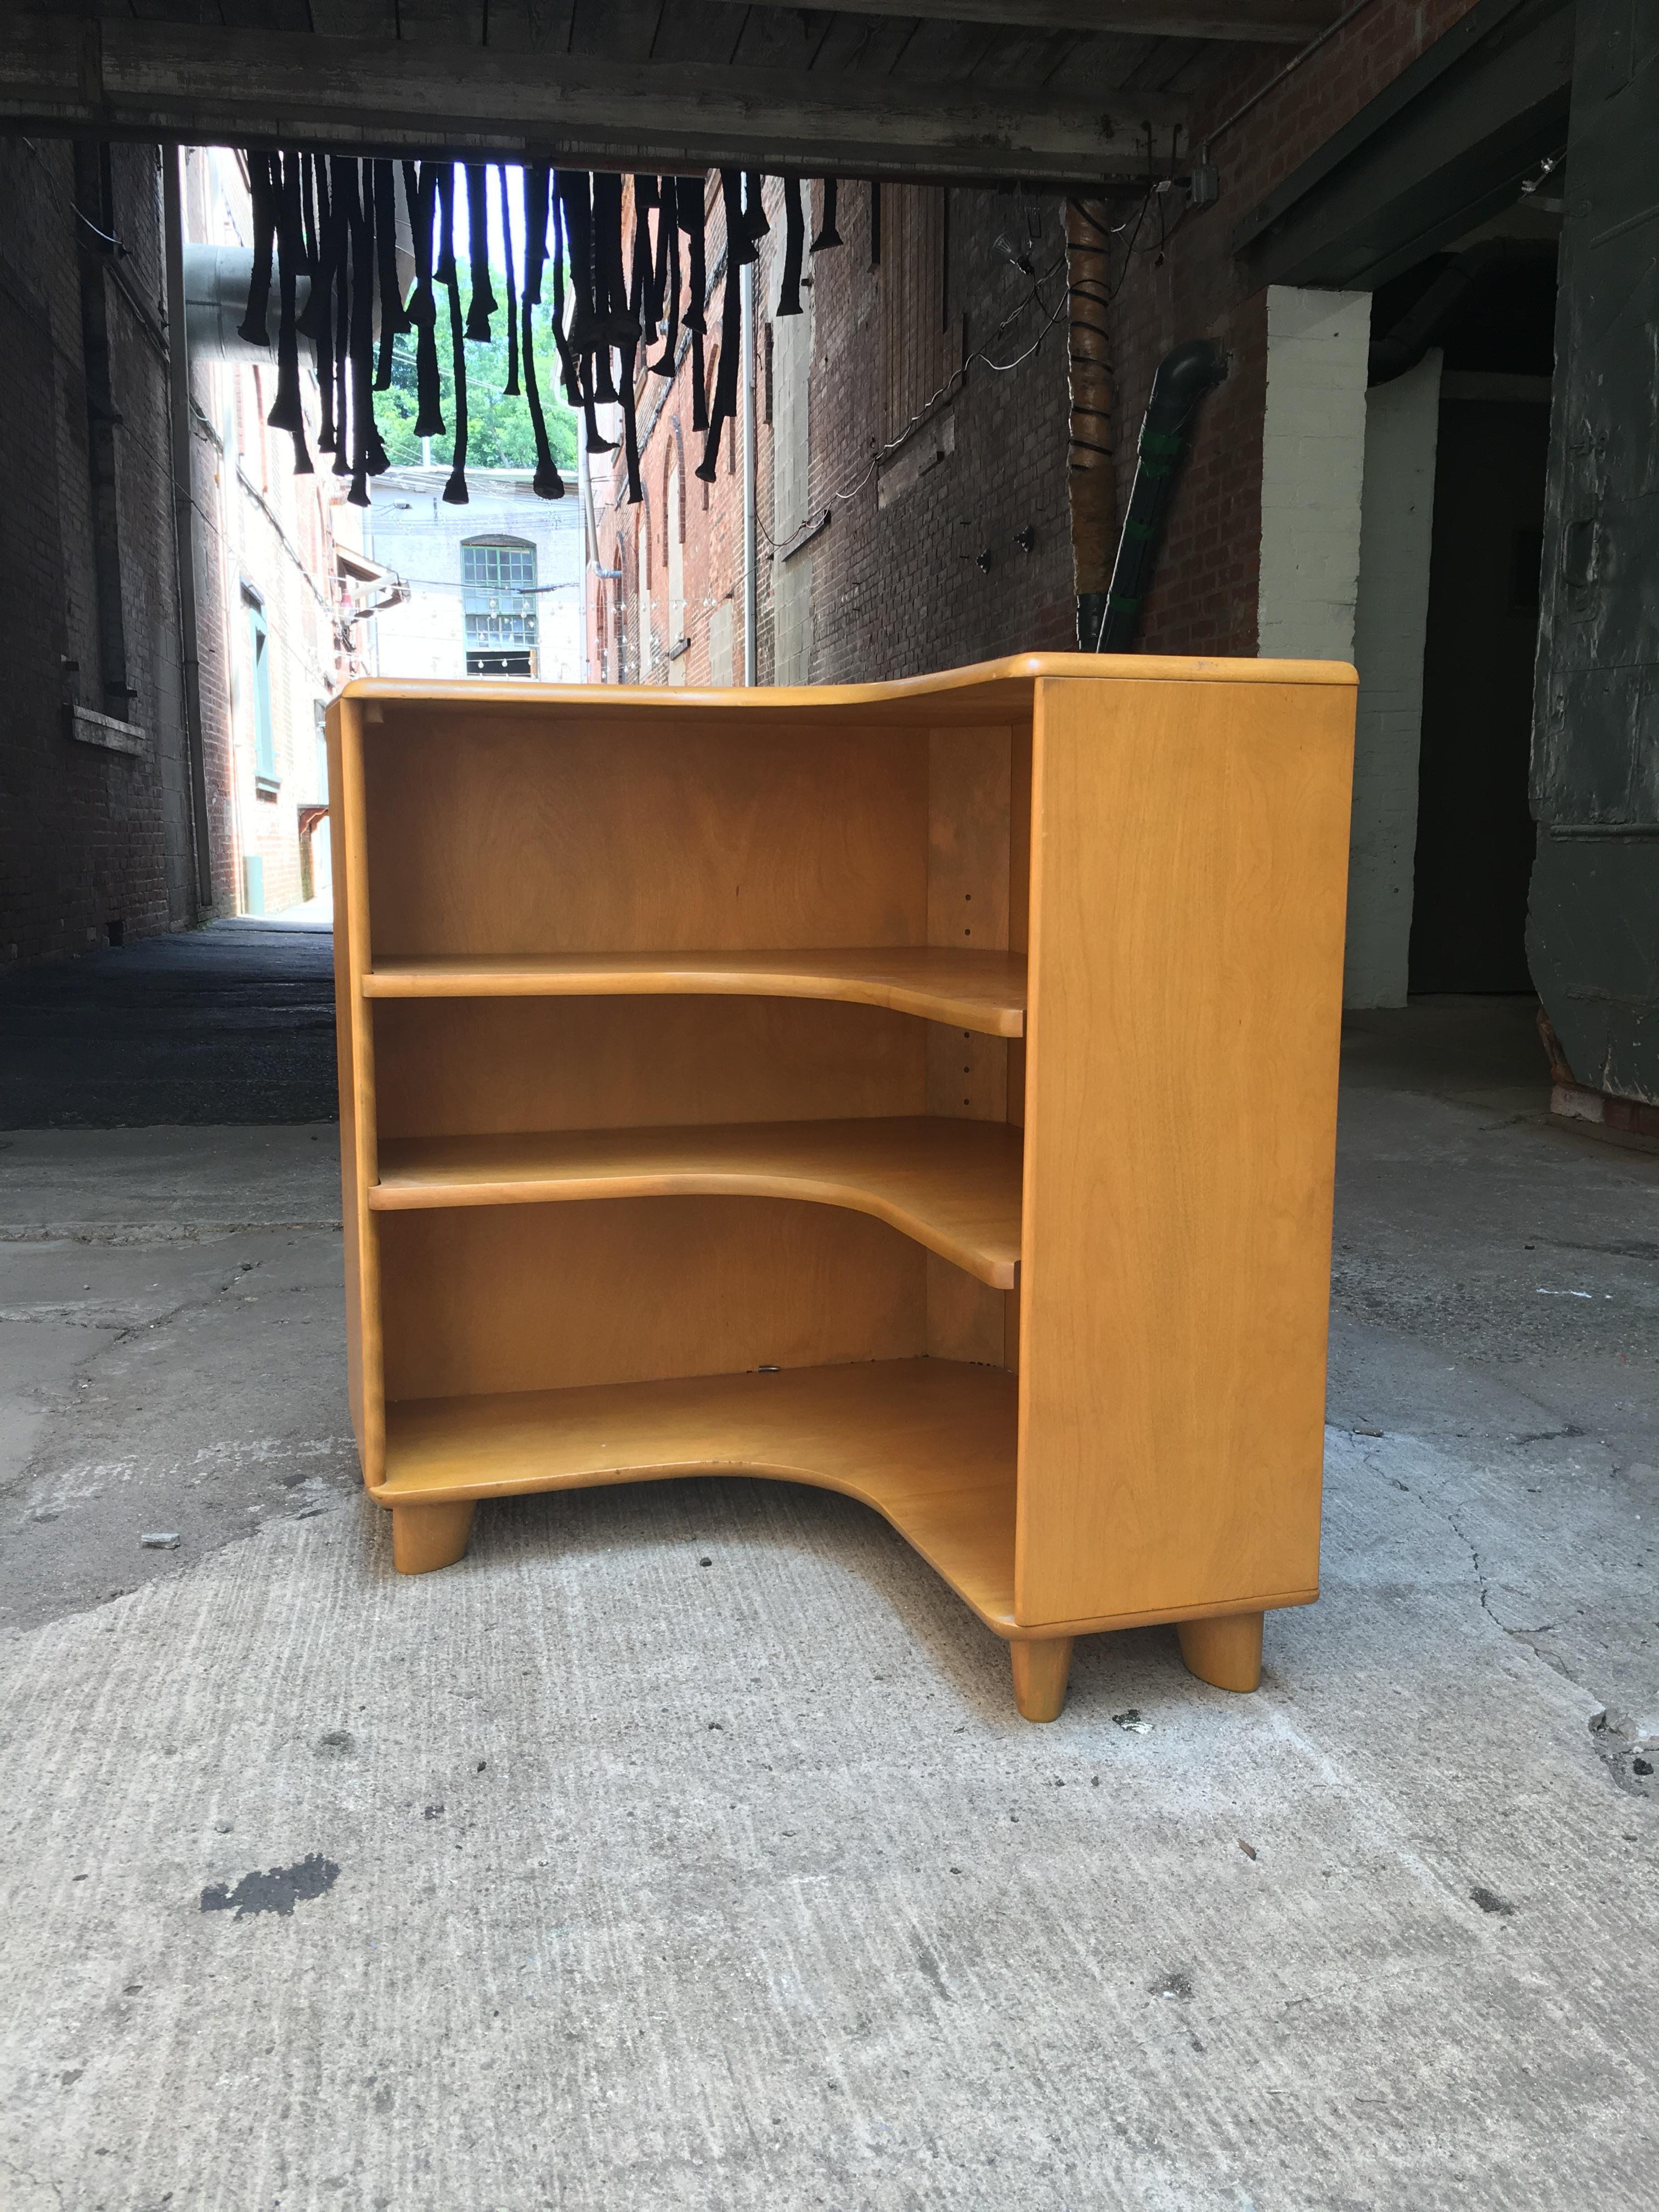 Heywood Wakefield corner bookcase in Wheat finish. C3971. Solid Maple construction. Very good original finish with minor finish loss on one shelf. Illegible date stamp on the back possibly March, 21, 1955.

Measures: 28